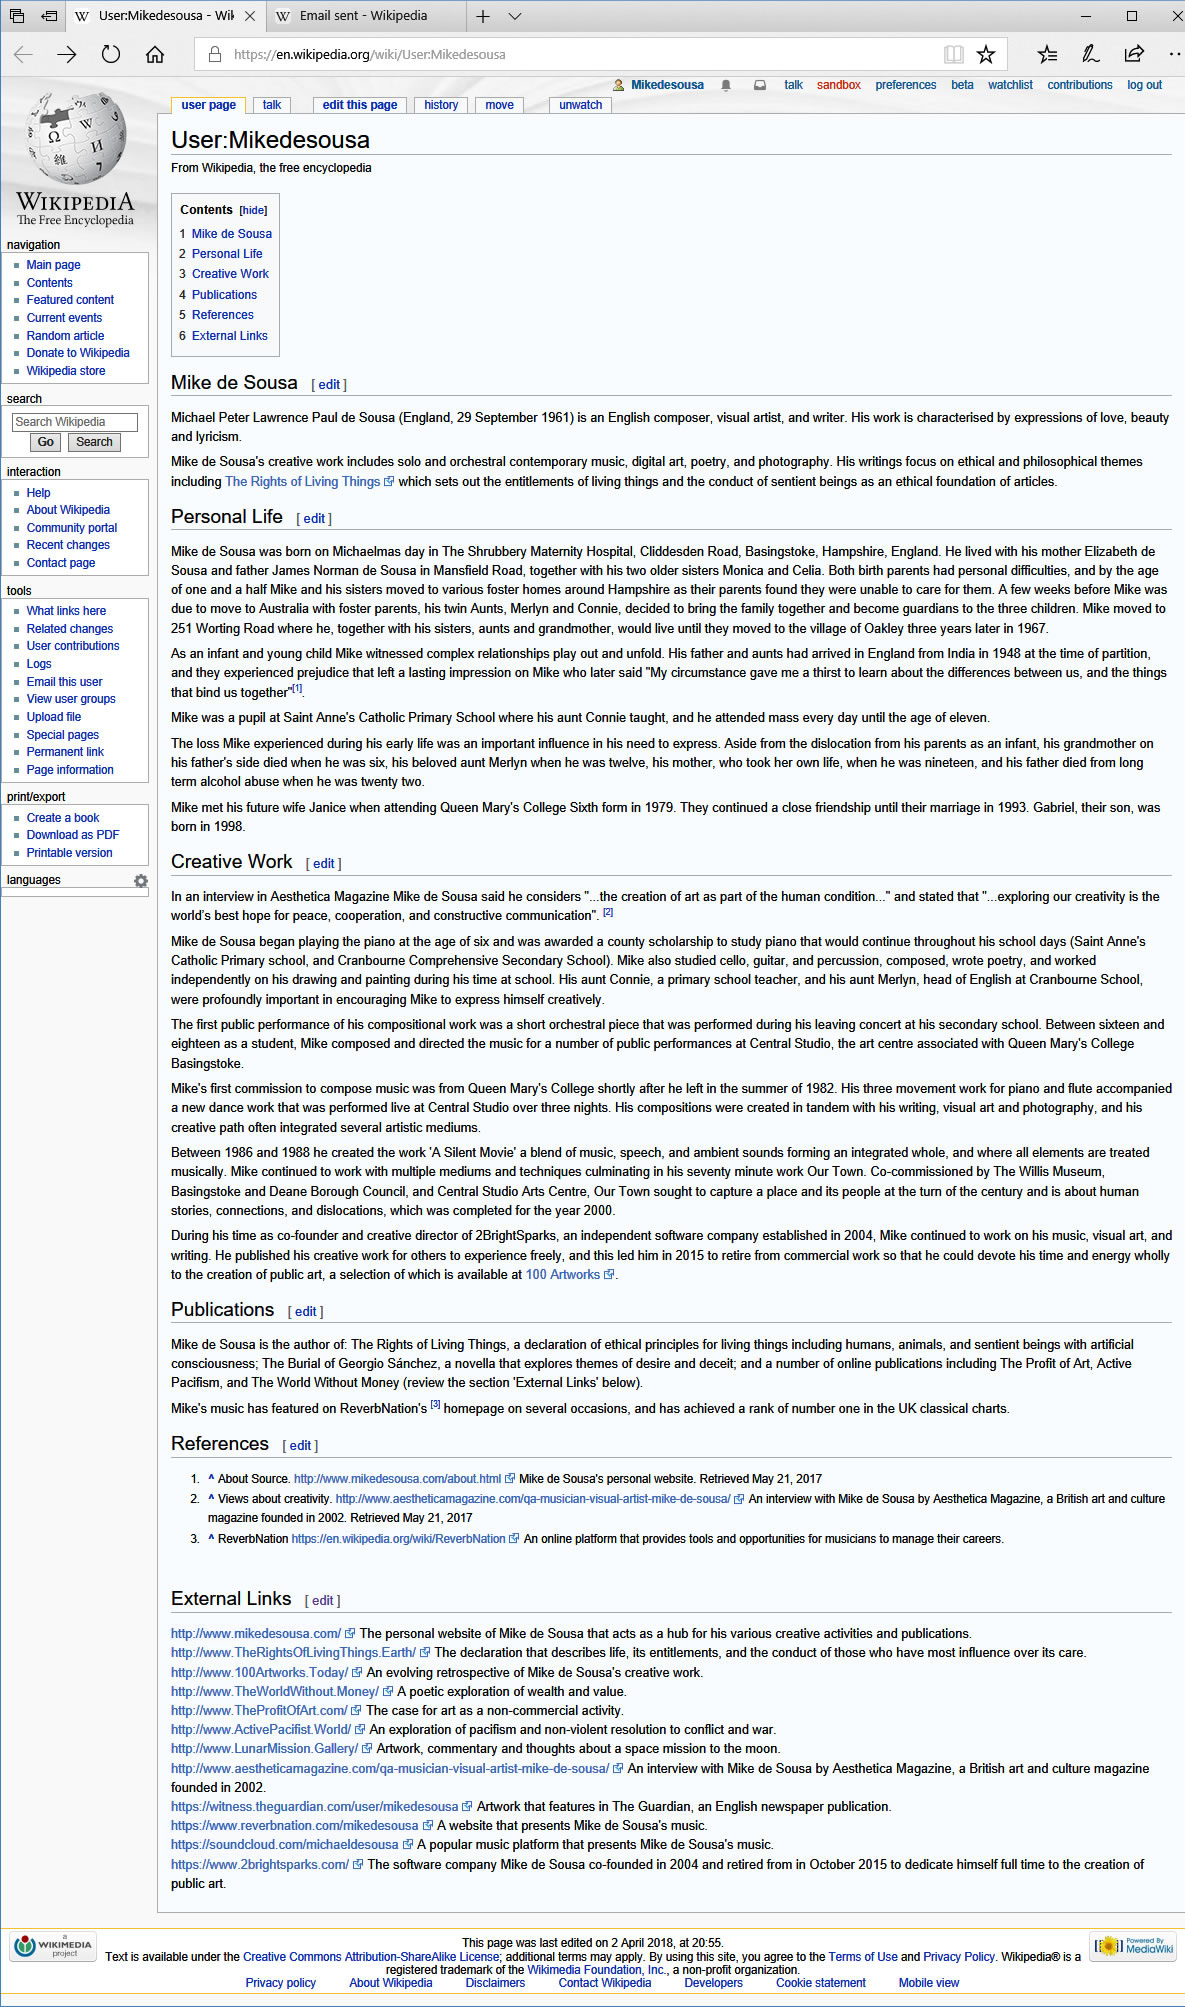 Wikipedia page about Mike de Sousa before its deletion